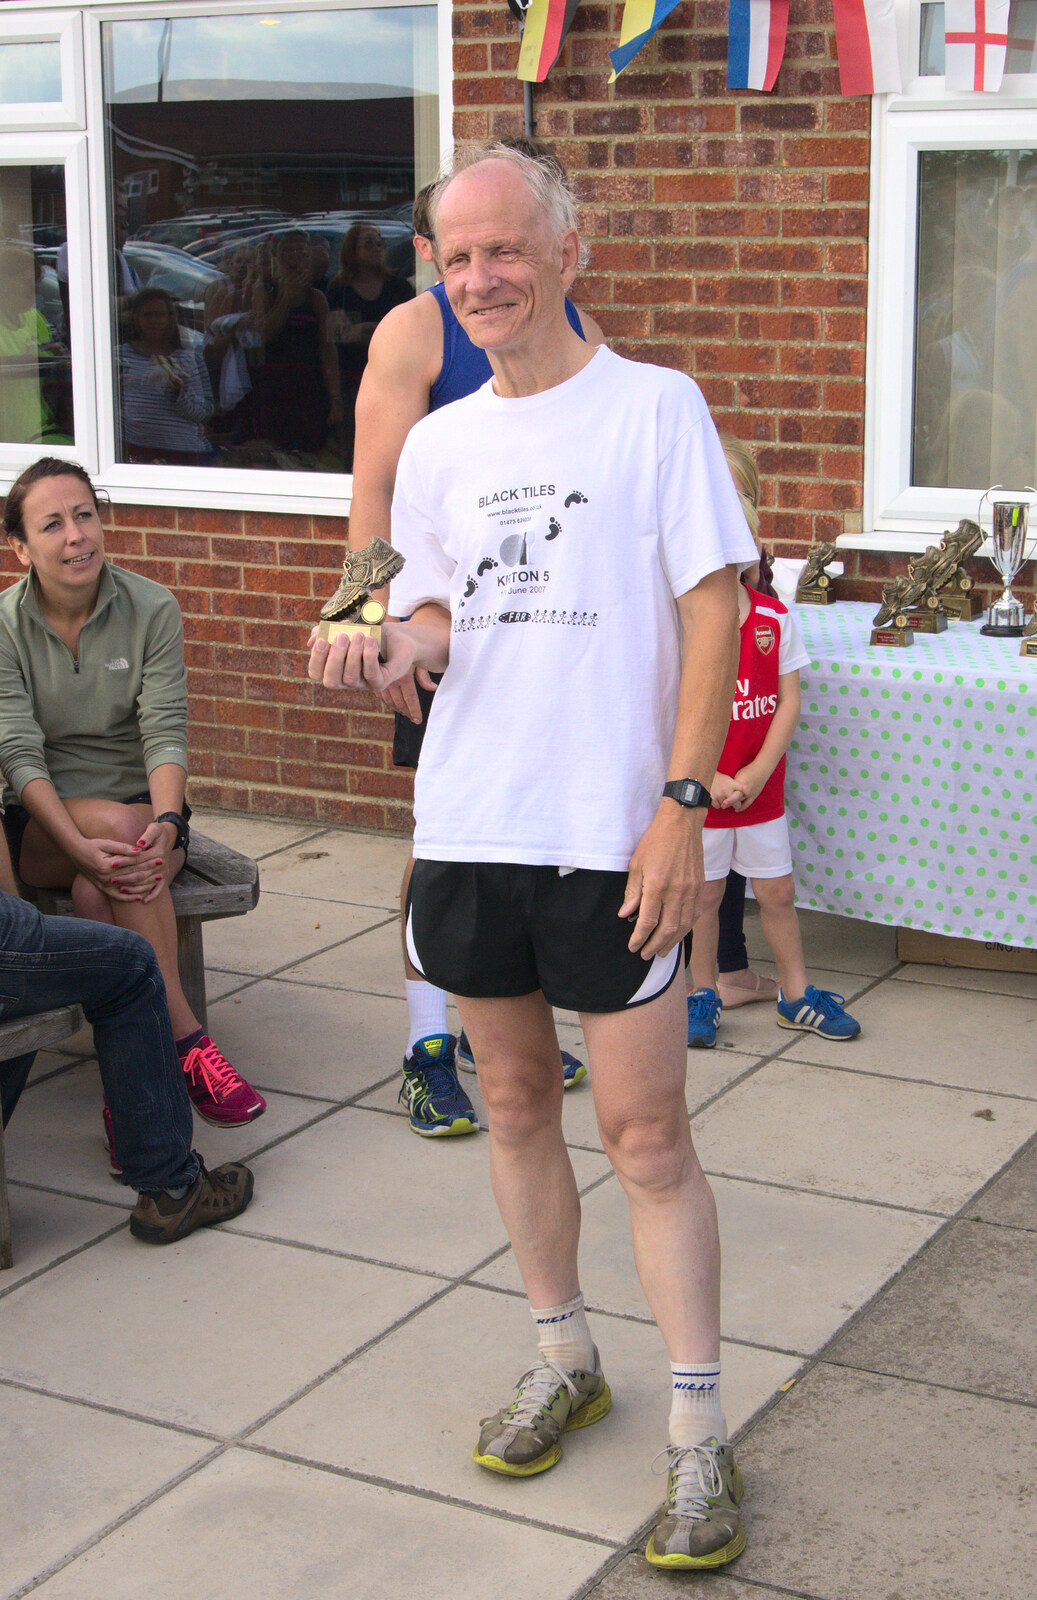 Some dude wins a prize from The Framlingham 10k Run, Suffolk - 31st August 2014